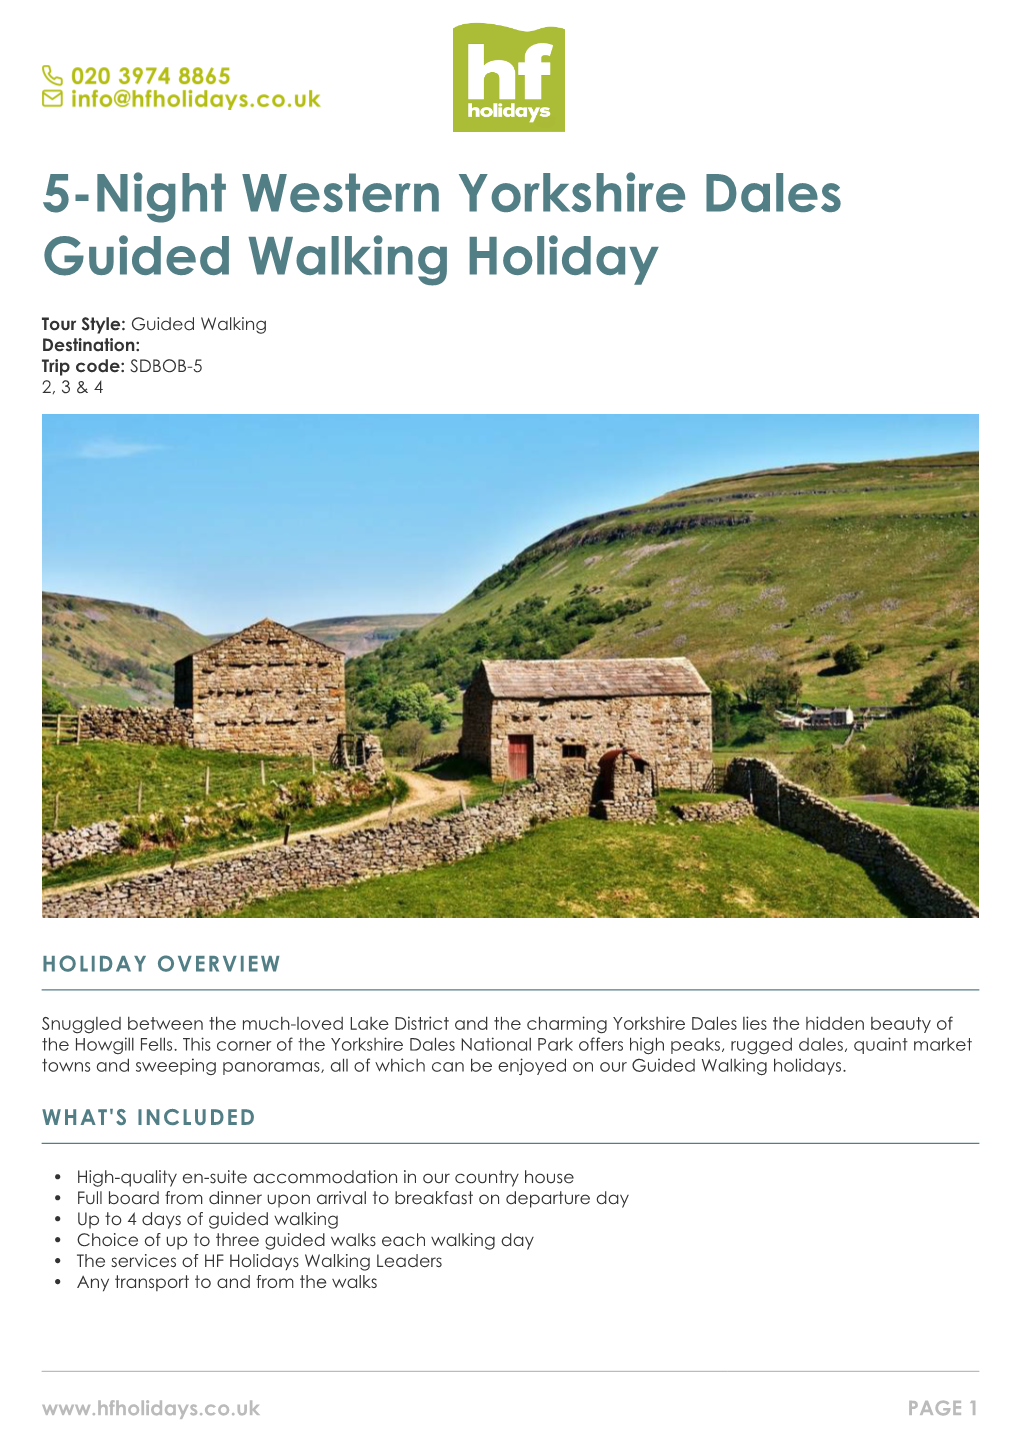 5-Night Western Yorkshire Dales Guided Walking Holiday